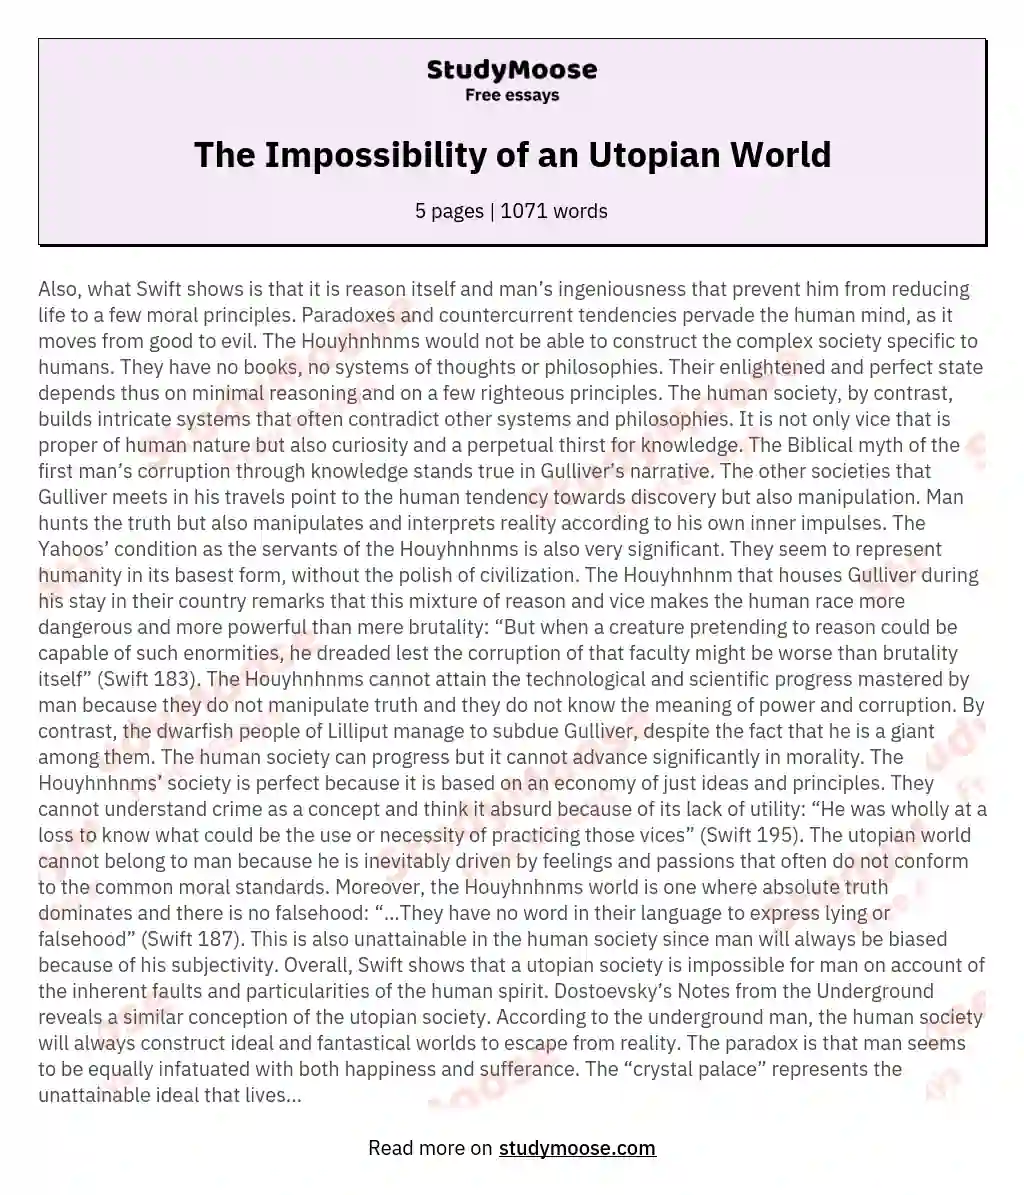 The Impossibility of an Utopian World essay